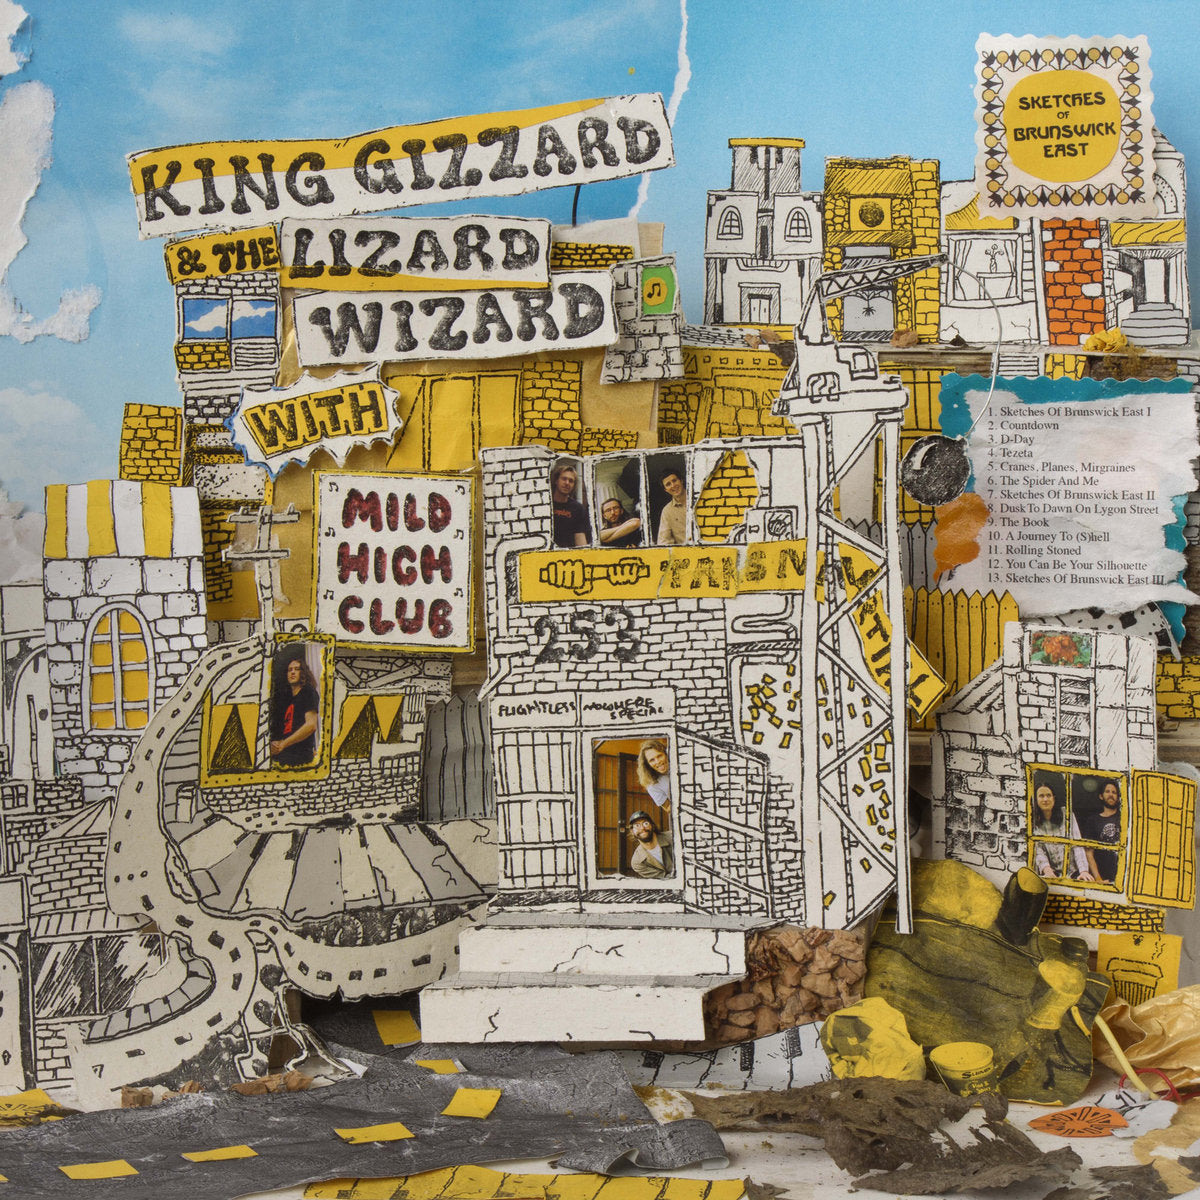 King Gizzard & The Lizard Wizard With Mild High Club: Sketches Of Brunswick East (Vinyl LP)